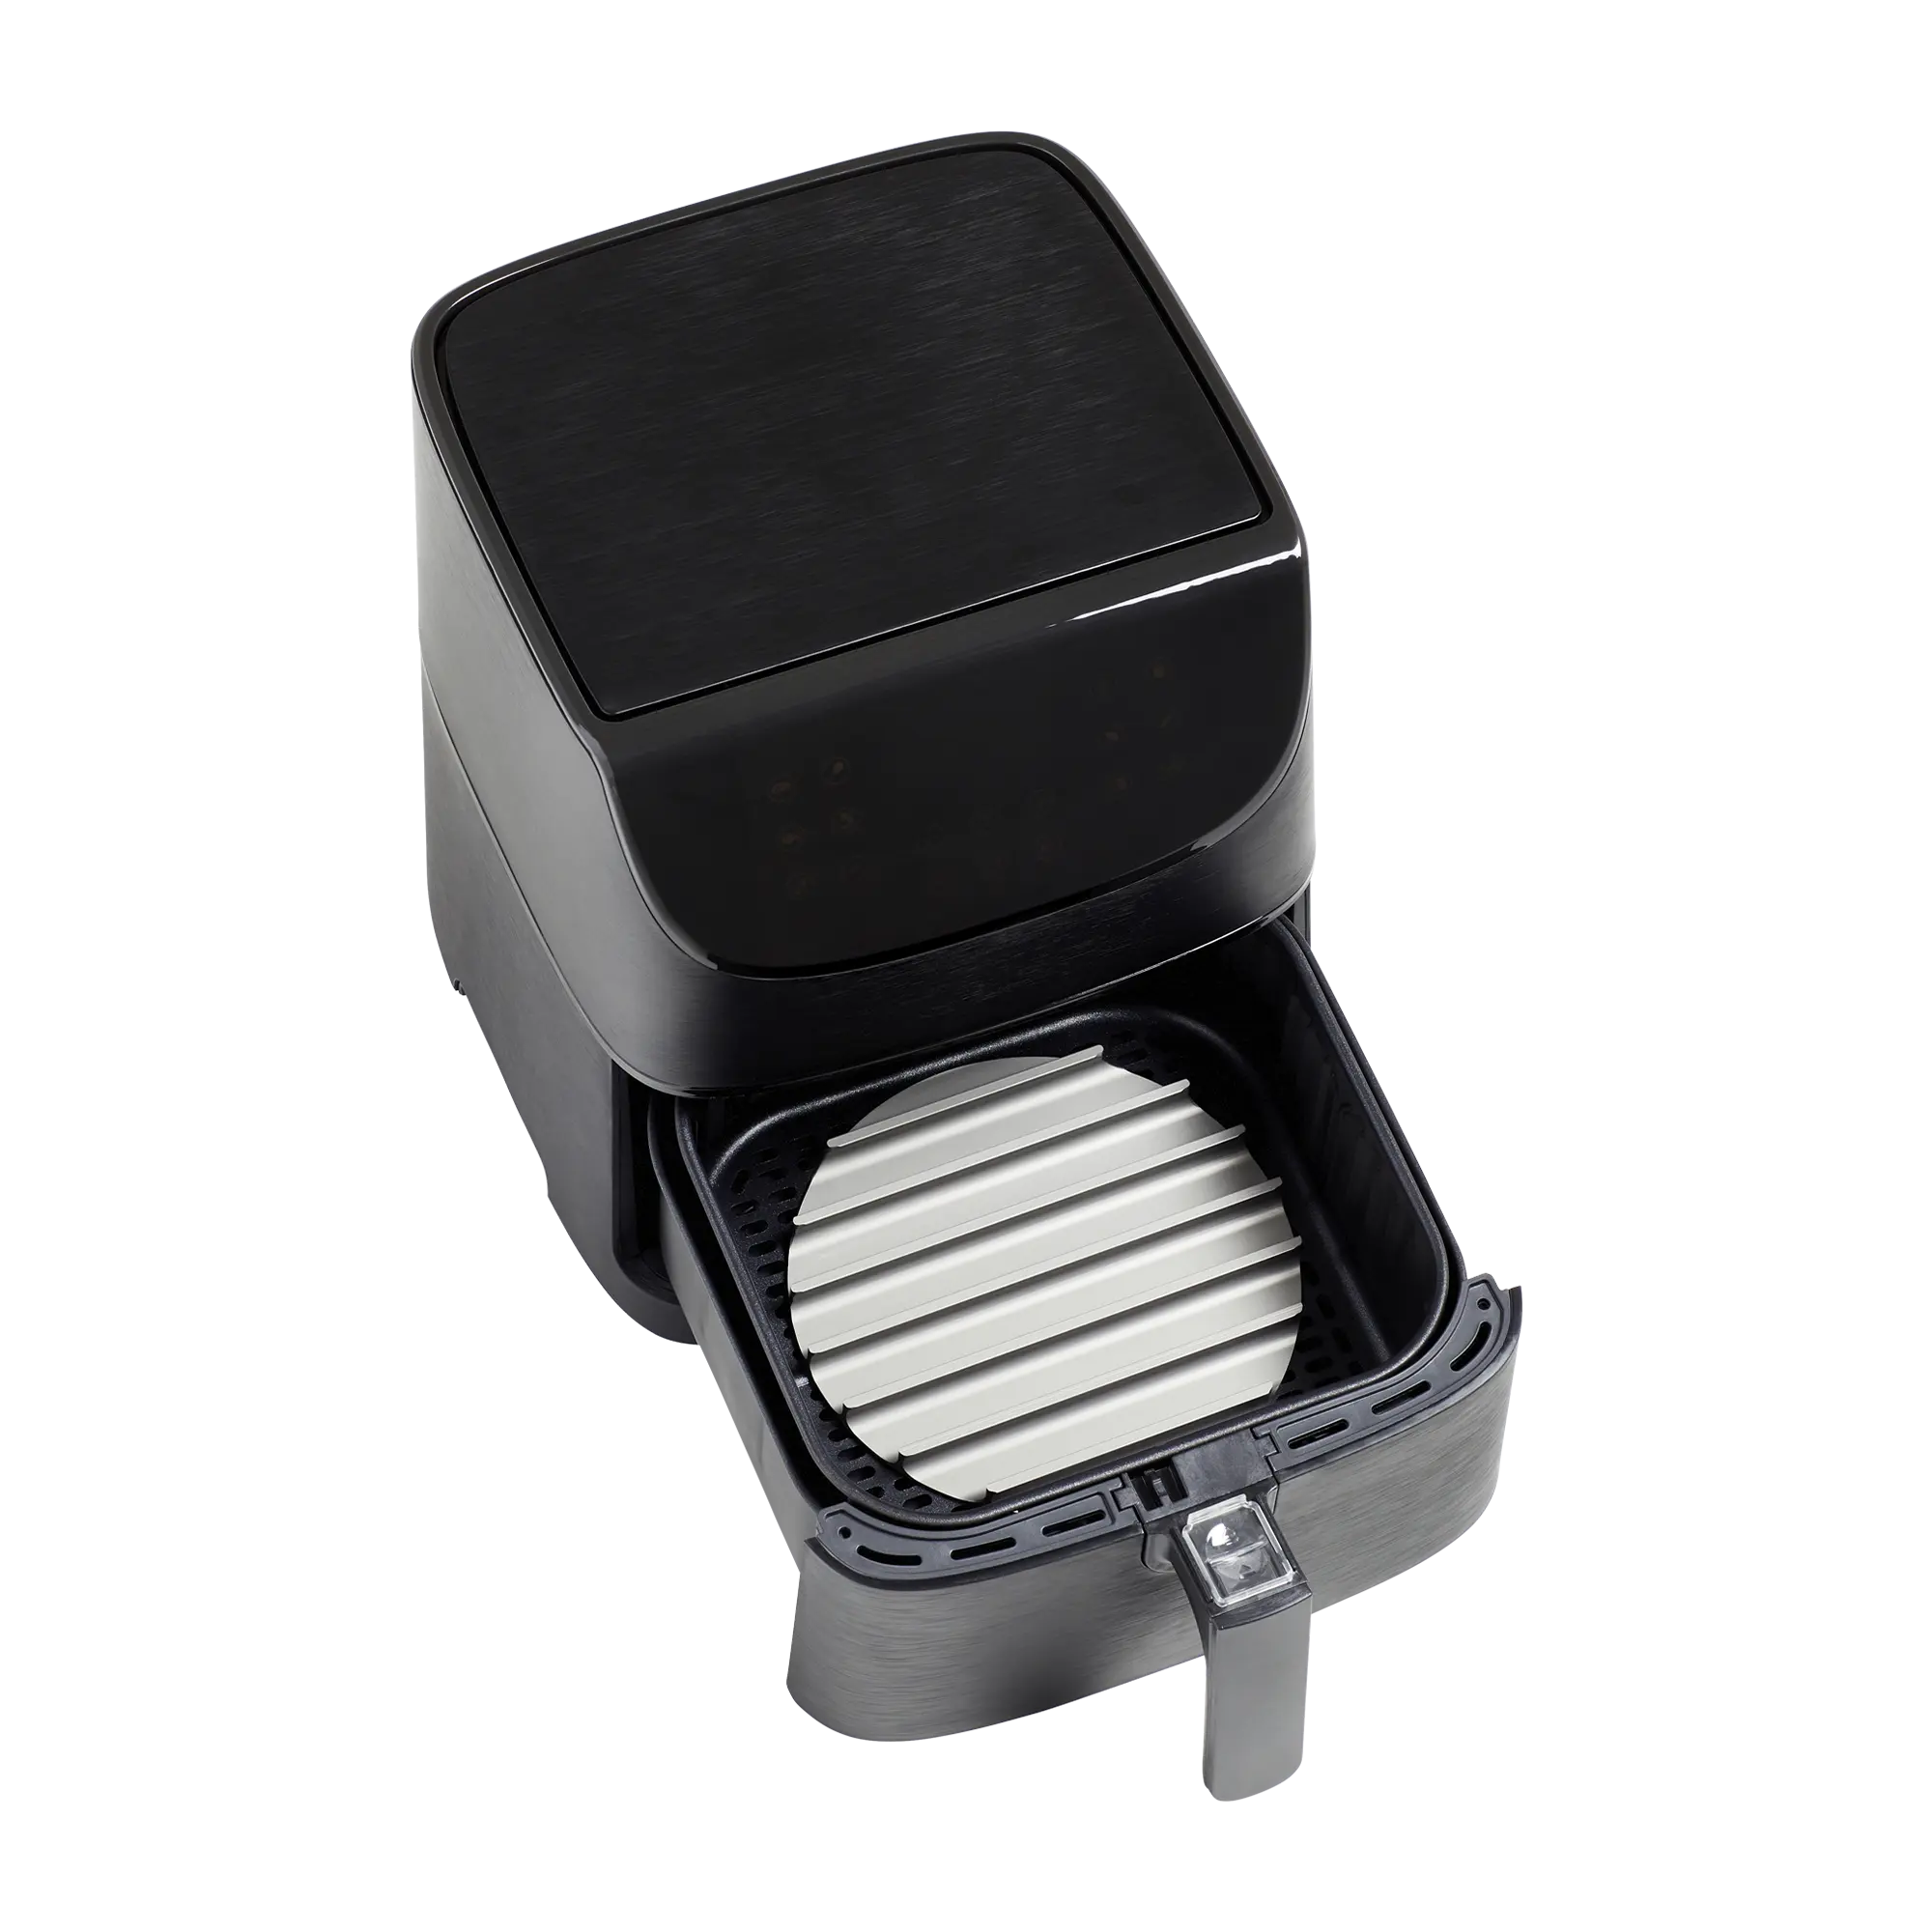 Sear'NSizzle GrillGrate for The Cosori Air Fryer | GrillGrate